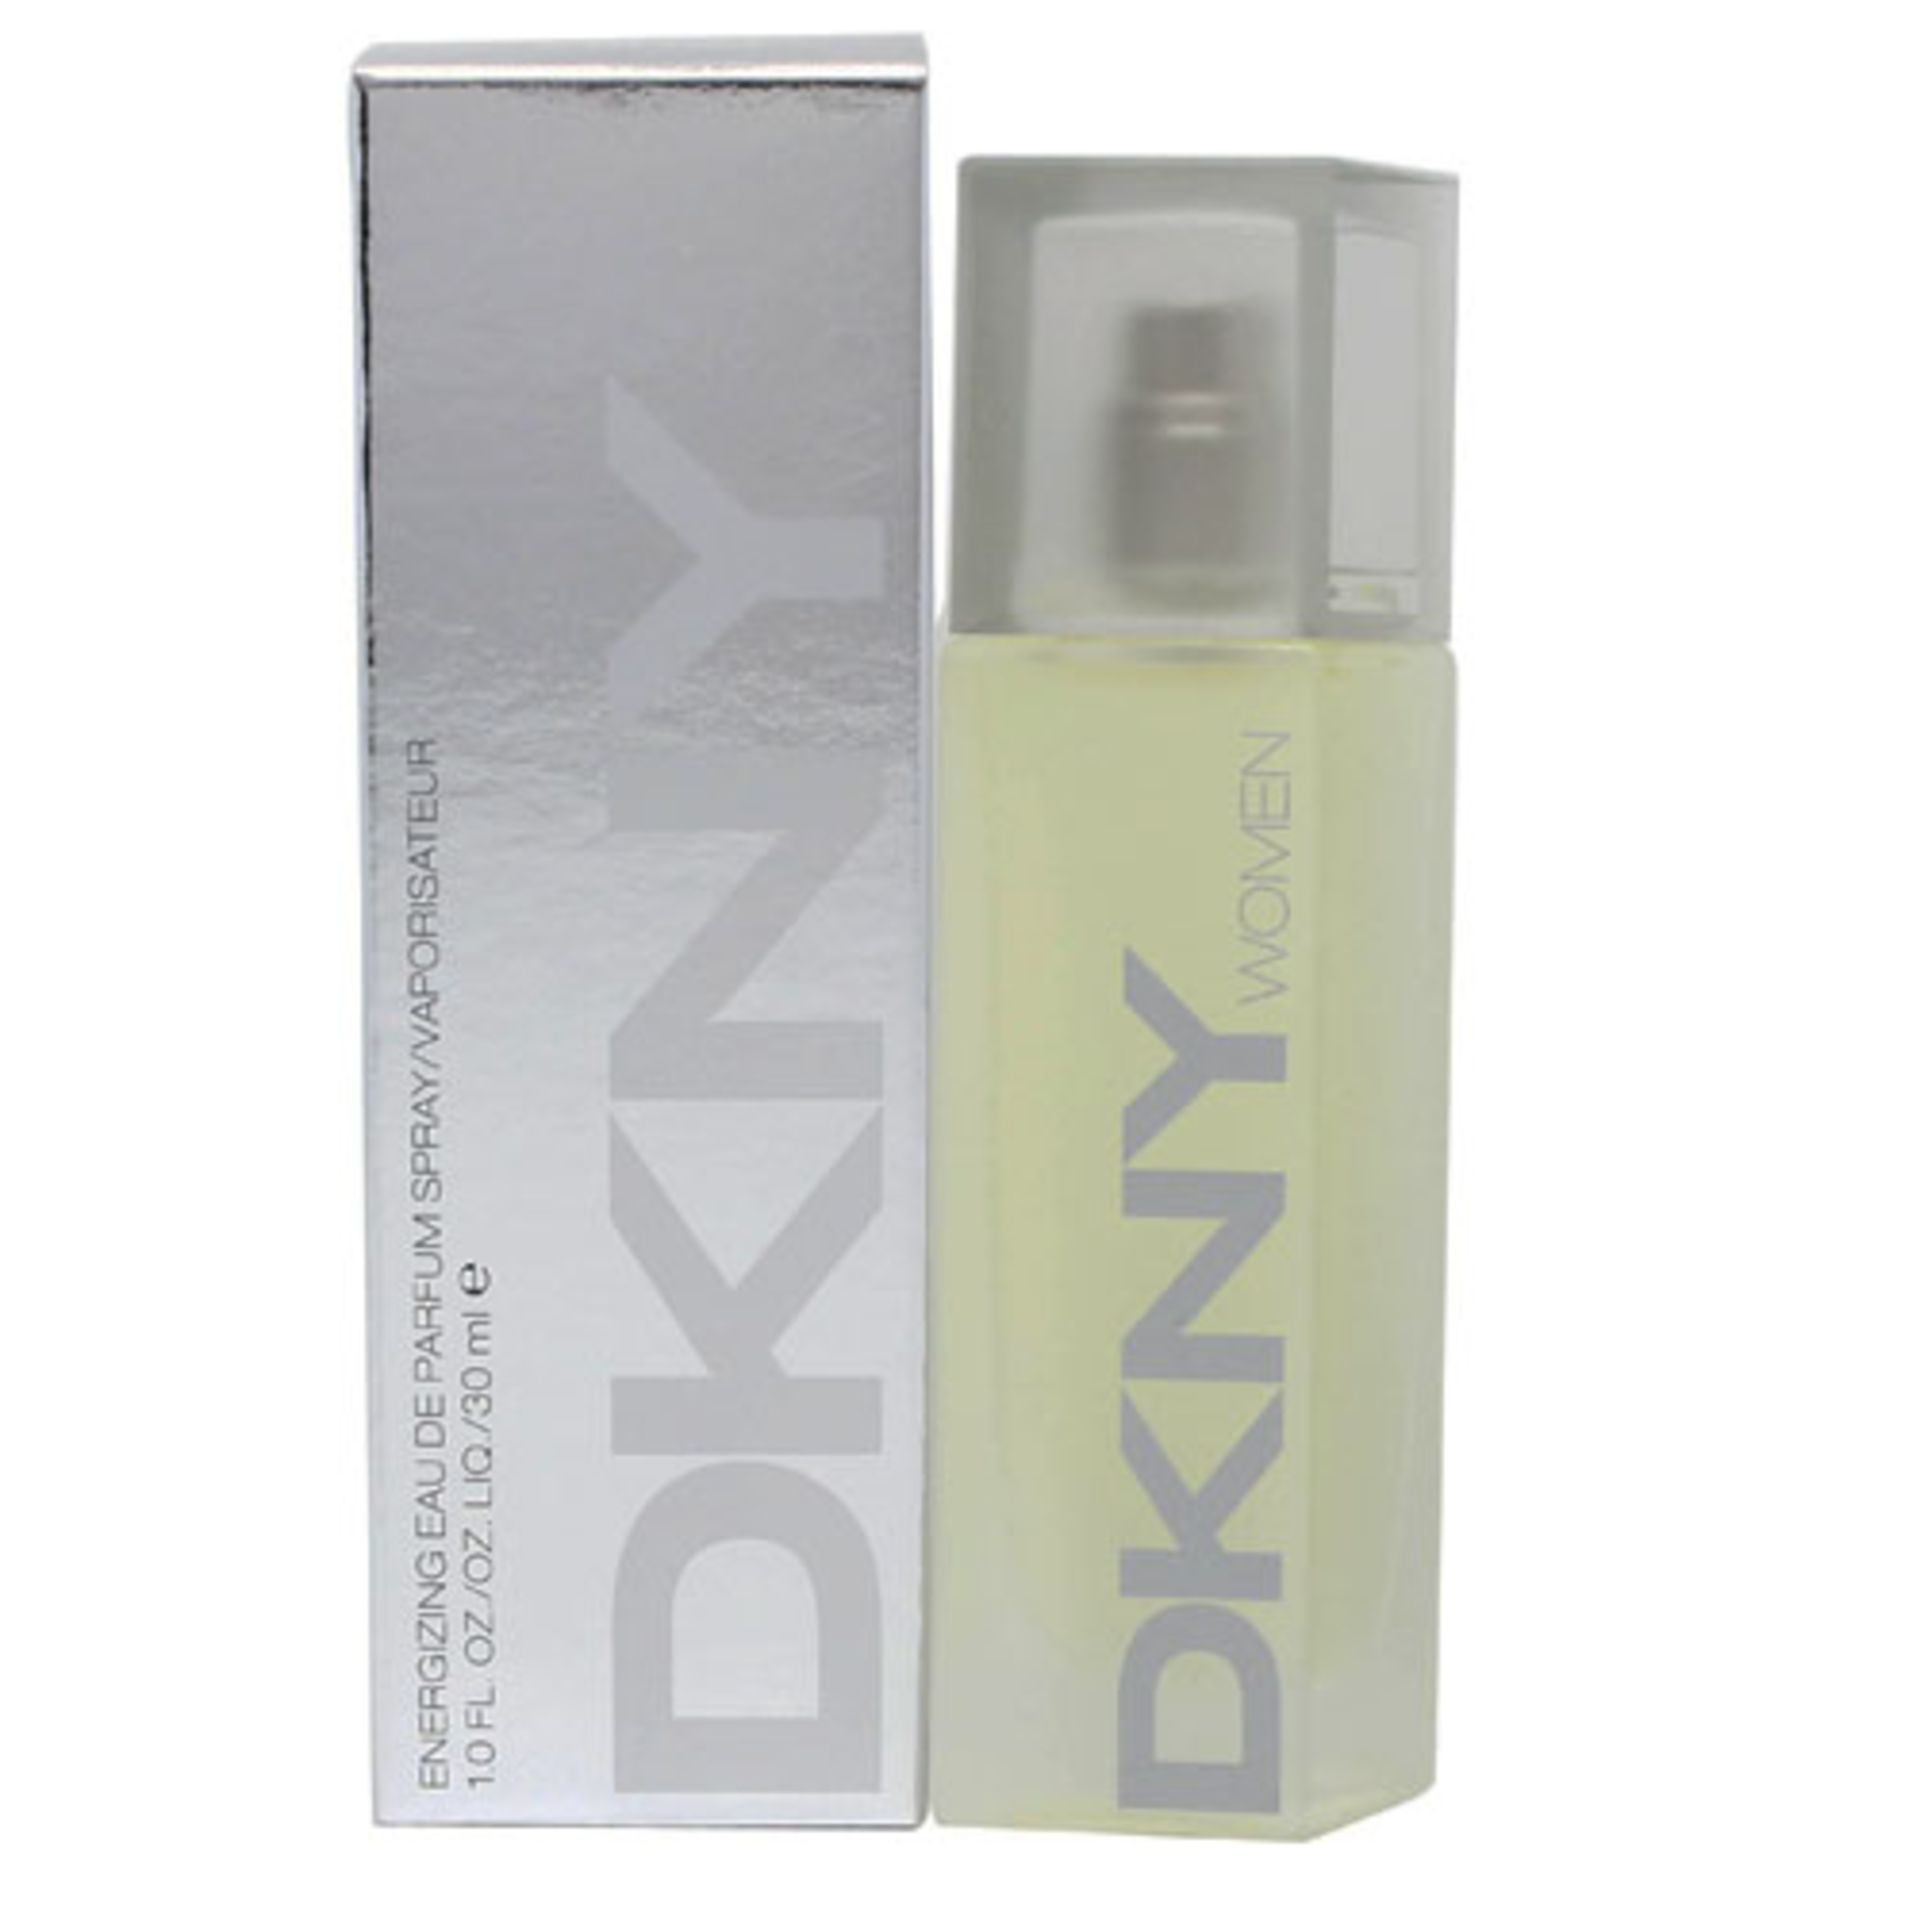 V Brand New DKNY For Women Energizing Eau De Toilette Spray 30ml X 2 YOUR BID PRICE TO BE MULTIPLIED